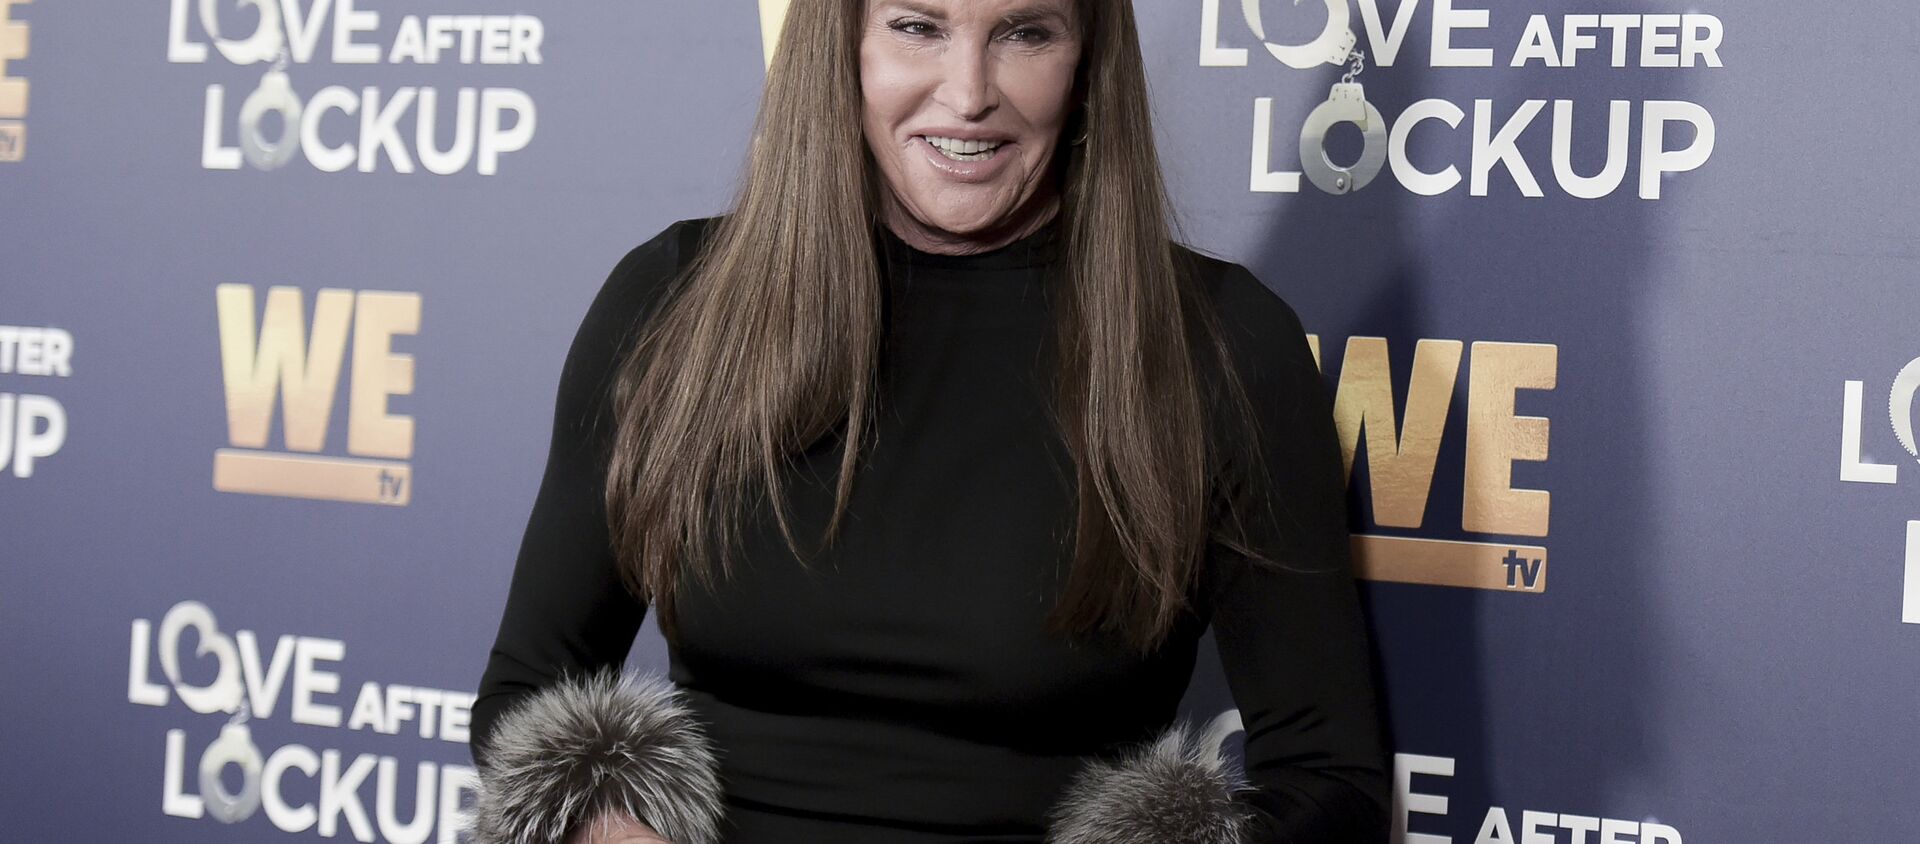 Caitlyn Jenner attends Real Love: Relationship Reality TV's Past, Present and Future on Tuesday, Dec. 11, 2018, in Beverly Hills, Calif. - Sputnik International, 1920, 17.07.2020